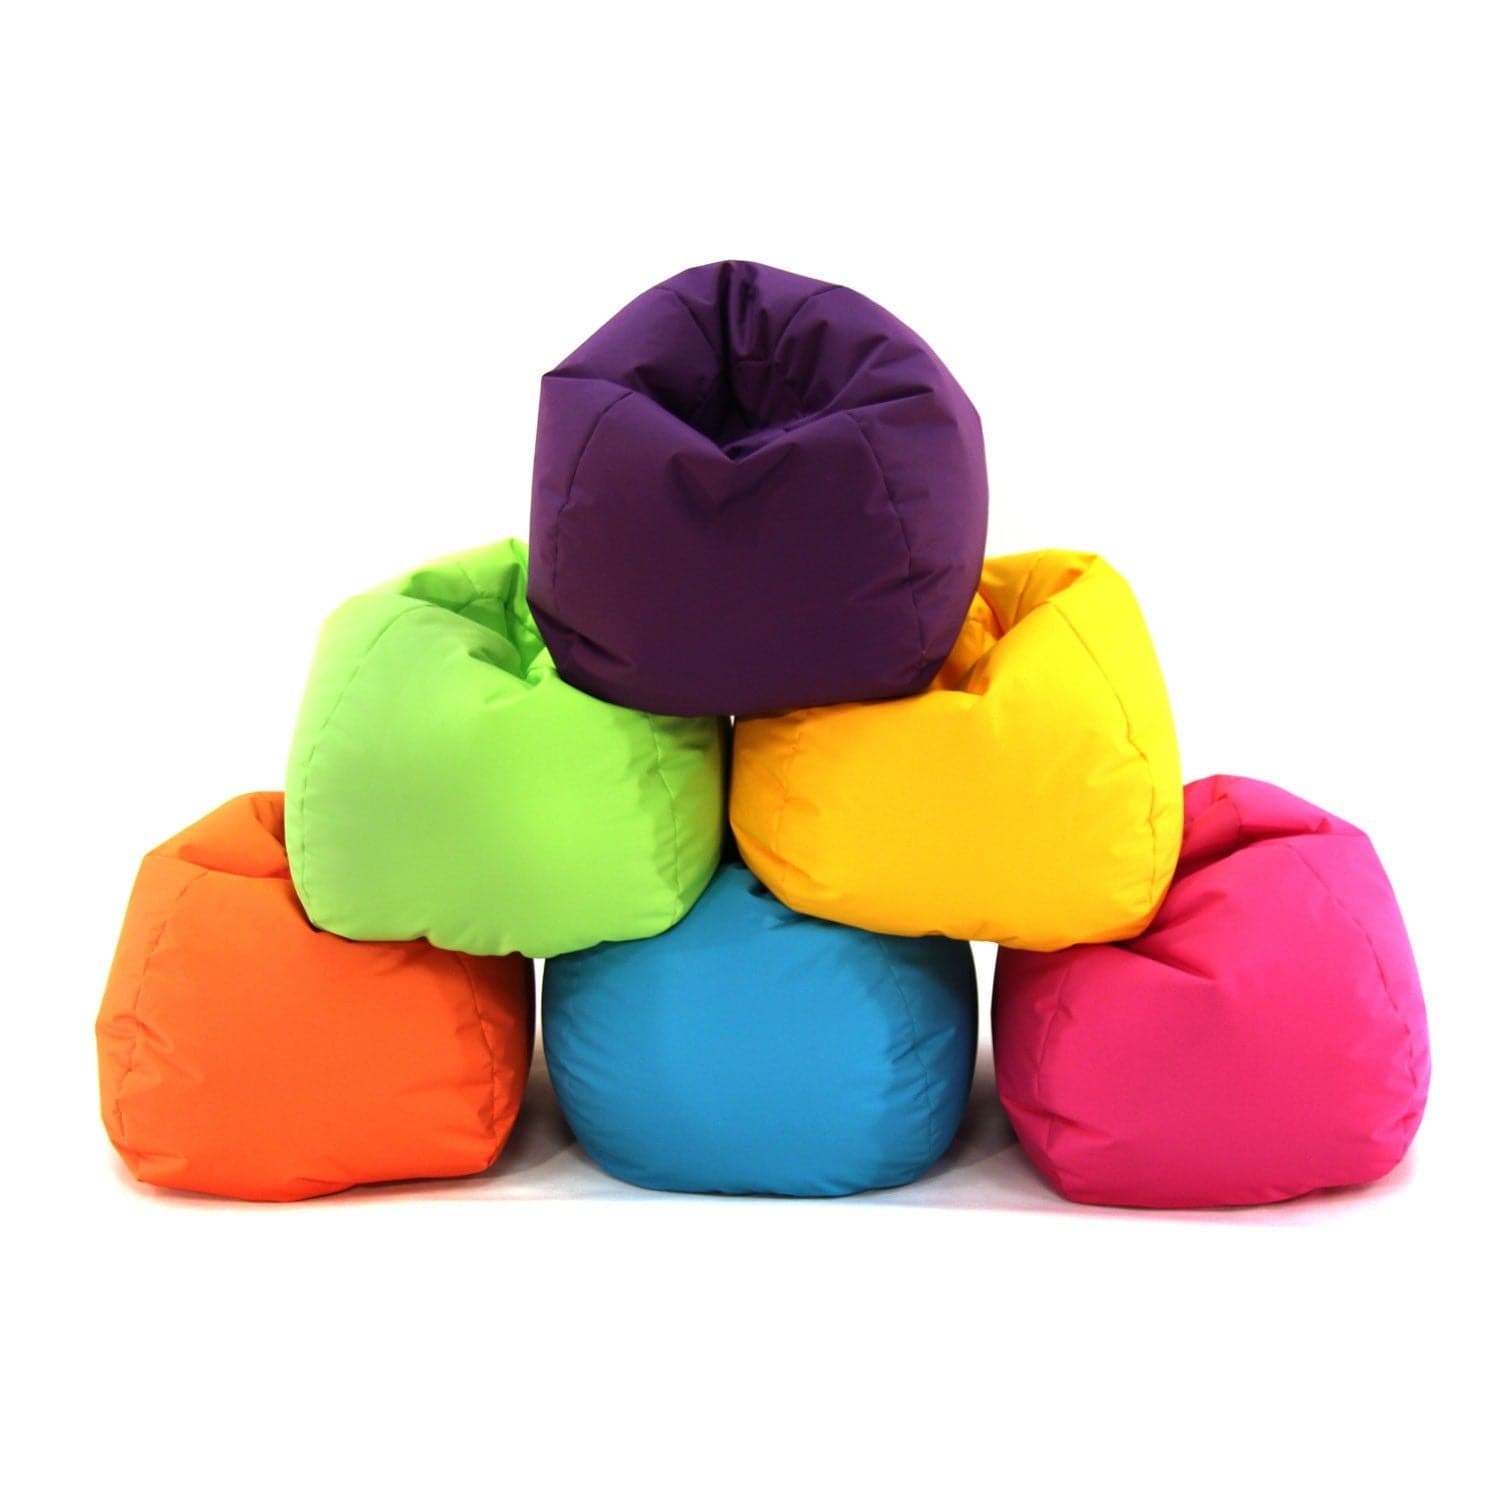 Nursery Bean Bags, The Nursery Bean Bags are small bean bags specifically designed as fit-for-purpose soft seating for early years settings. The Nursery Bean Bags are small but perfectly formed for little learners to help create a colourful, inspiring and welcoming nursery environment, especially for reading corners and story time. Bean bags are a fun, safe, soft seating option that the kids will love - they help make sitting still a treat! Made from durable and waterproof polyester, these nursery bean bags